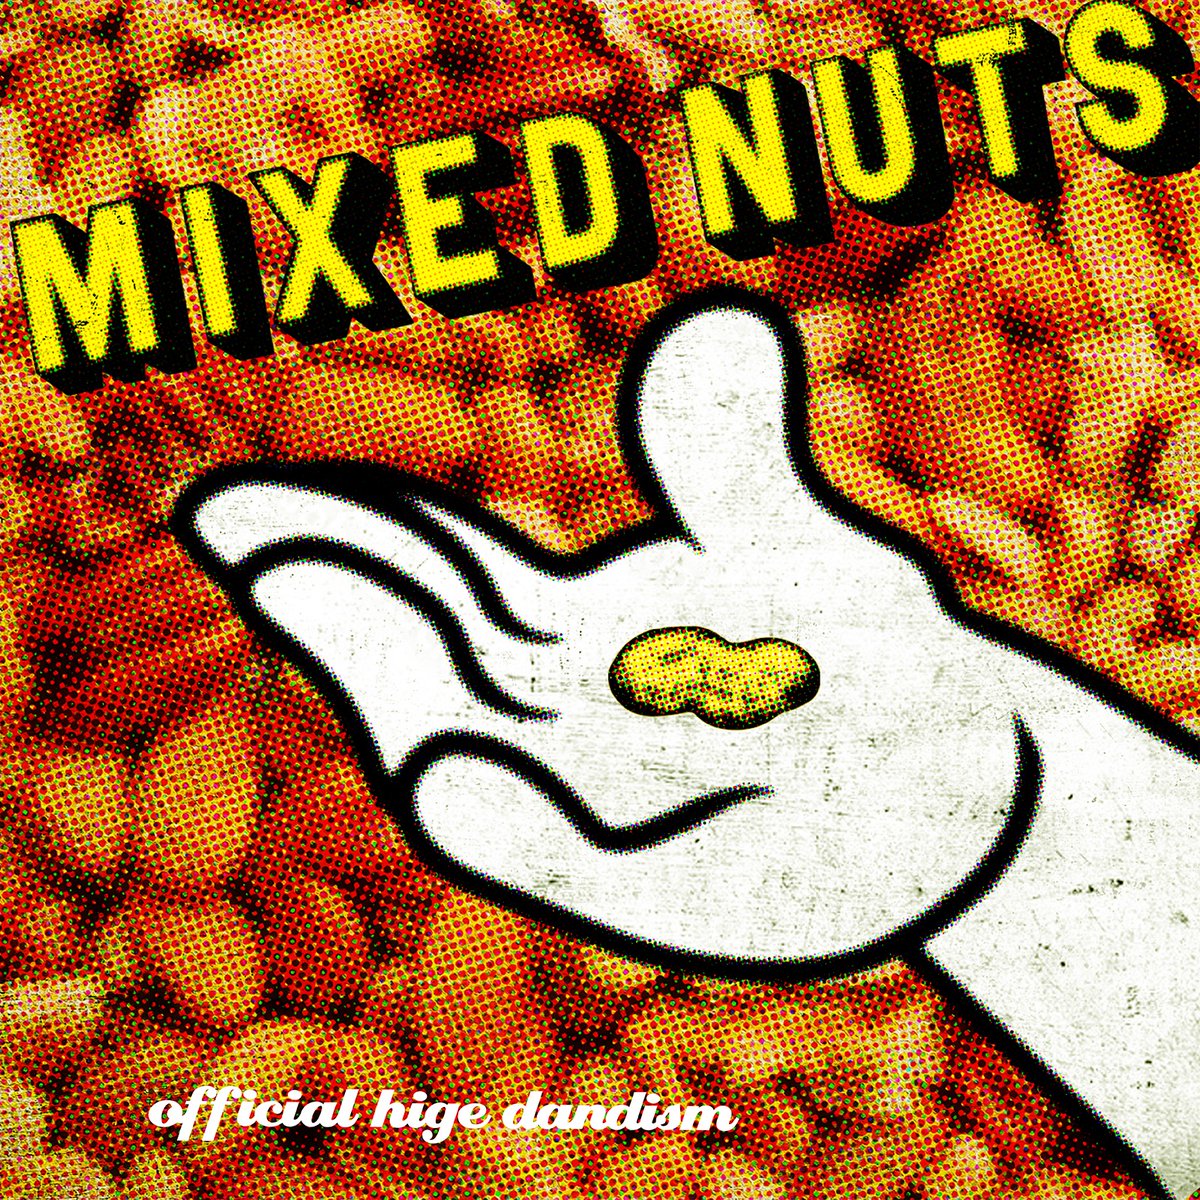 Cover for『Official HIGE DANdism - Mixed Nuts』from the release『Mixed Nuts』